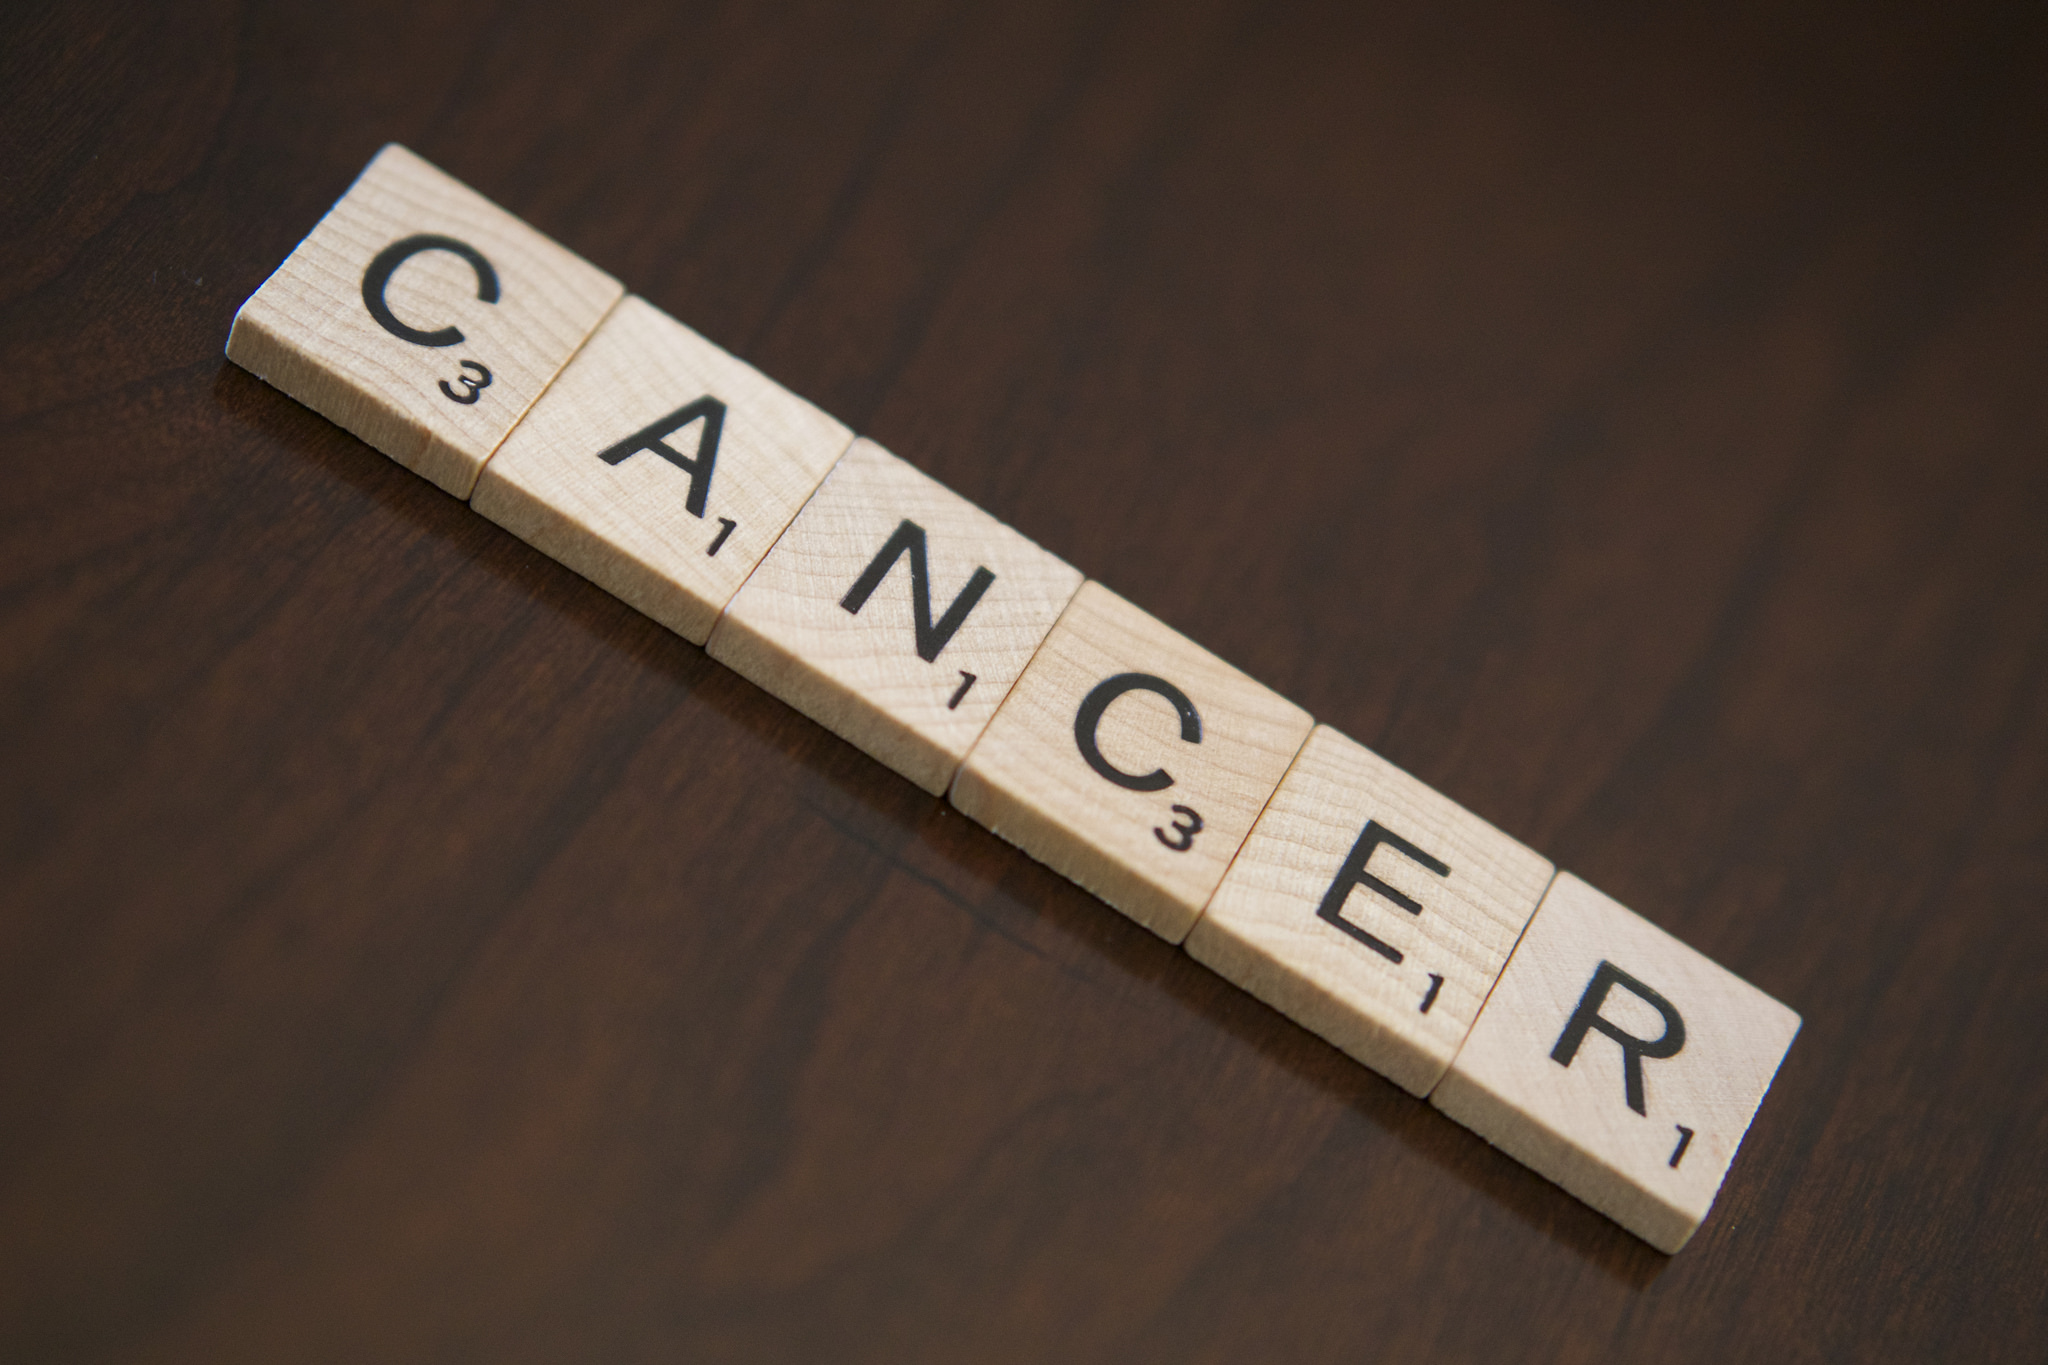 Cancer spelled with scrabble tiles